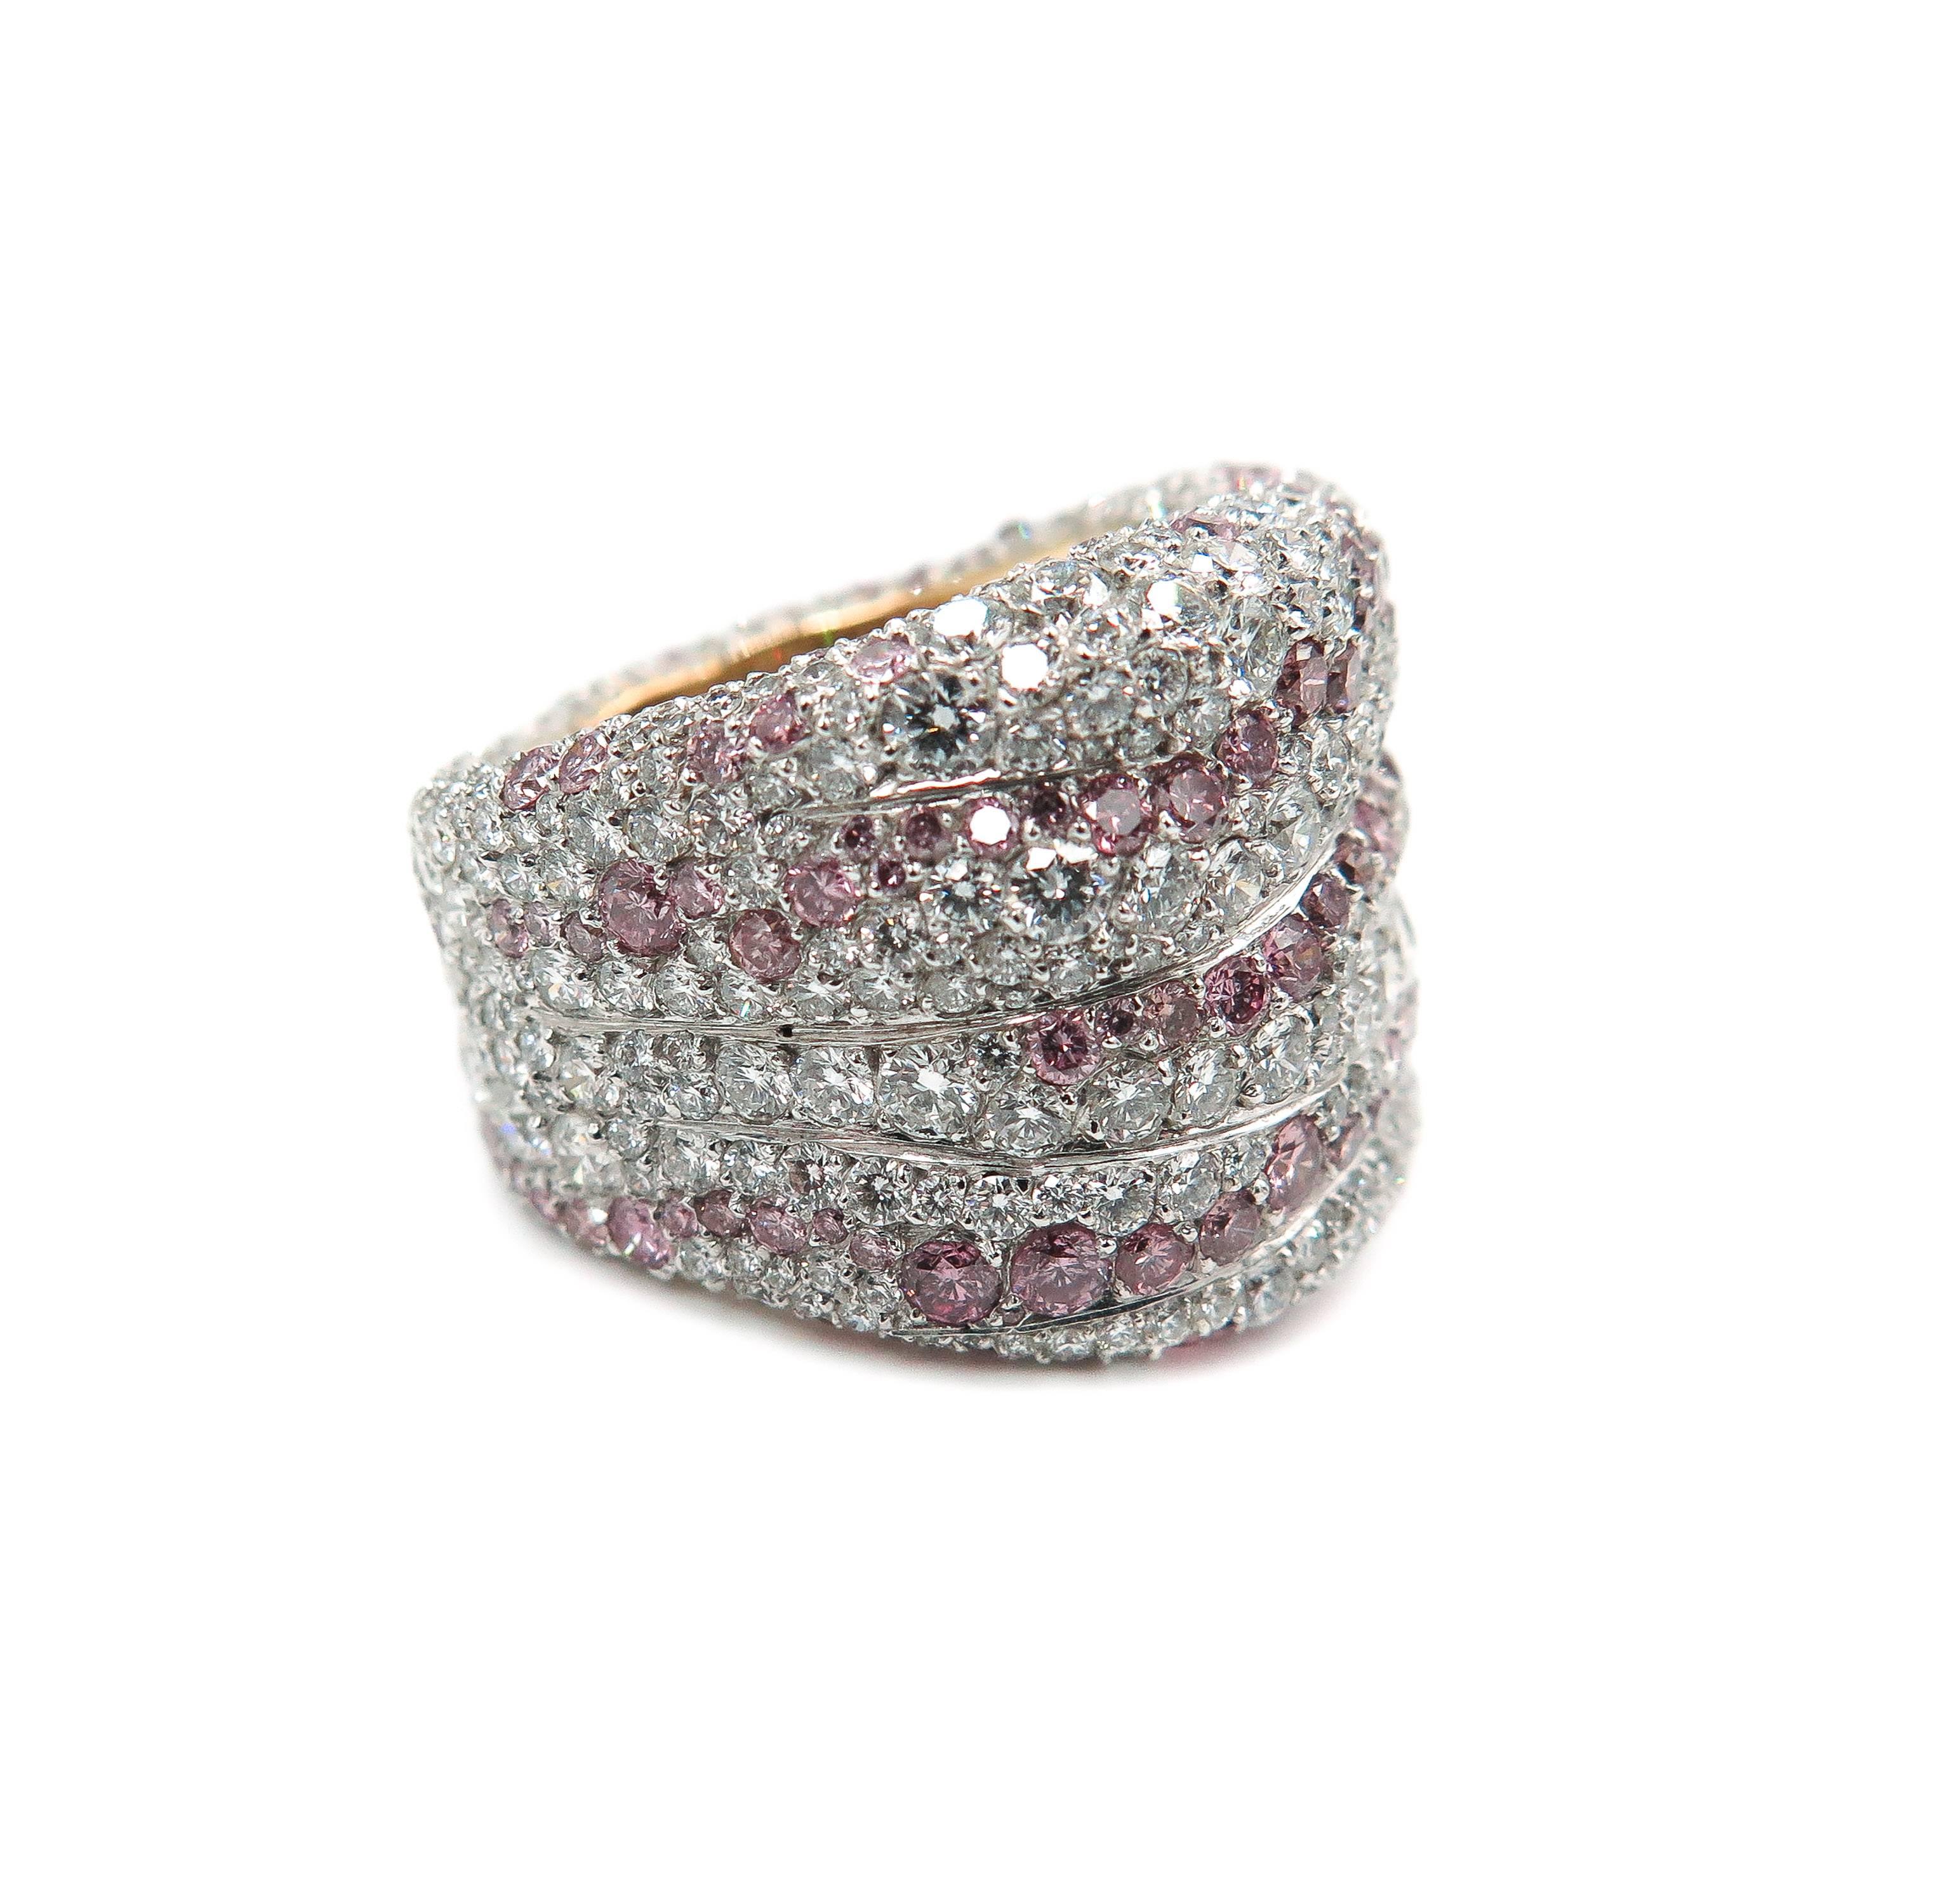  Explore the intellectual and artistic richness of Modern Fabergé in this bold and daring  design and craftsmanship.
 This ring is infused with white and intense pink diamonds giving a fluid wavy  pattern of color unlike any other.
The total white